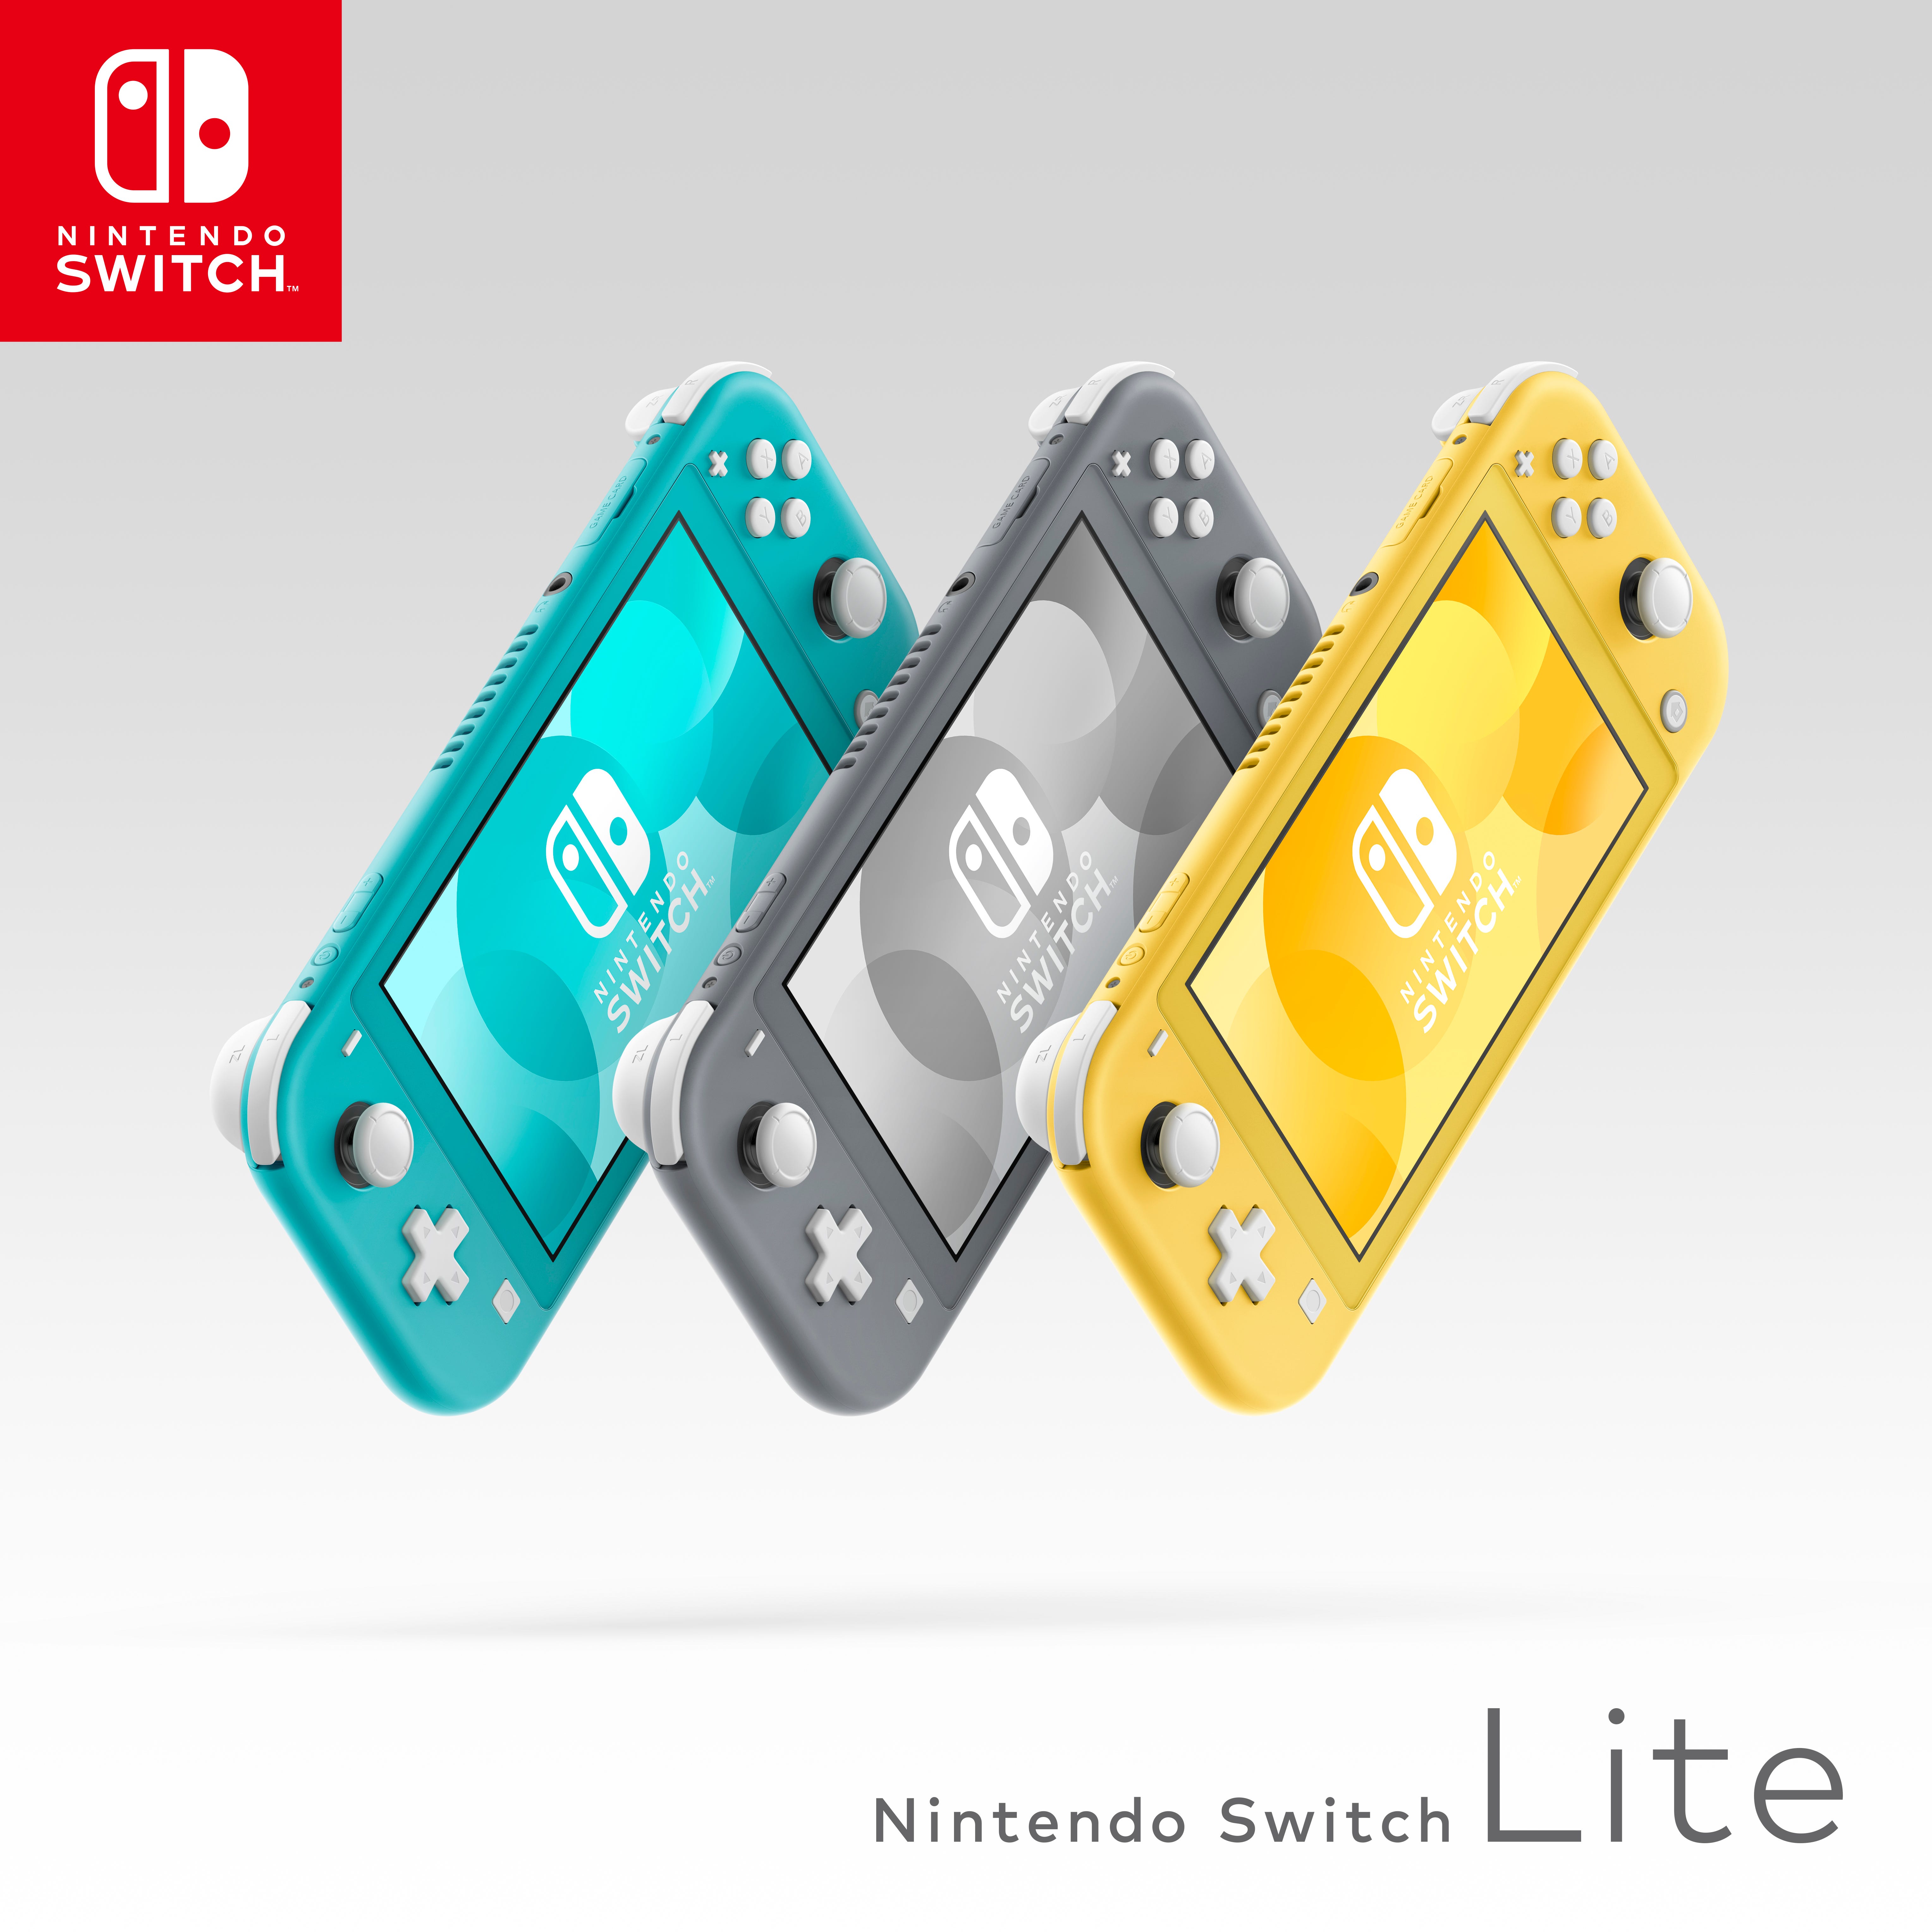 Nintendo Switch Lite: New console out in September for $199.99